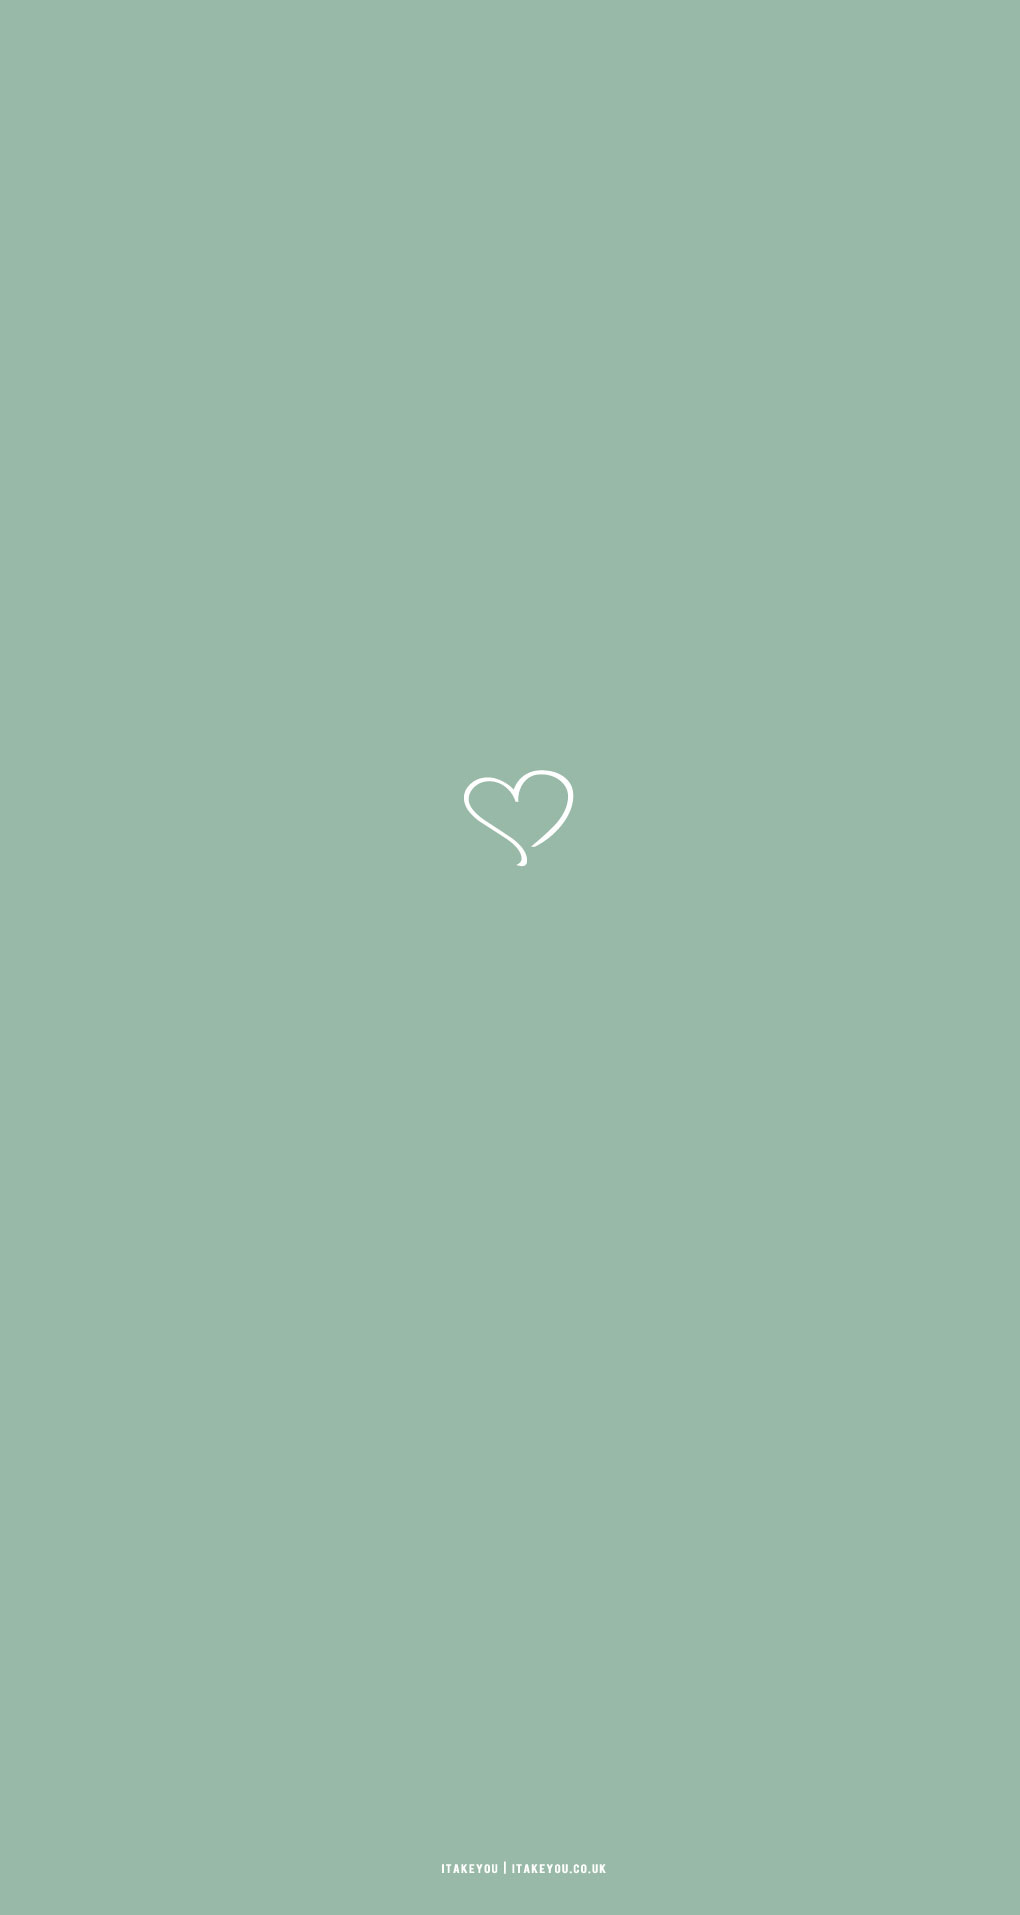 15 Sage Green Minimalist Wallpapers for Phone : Cute Heart I Take You